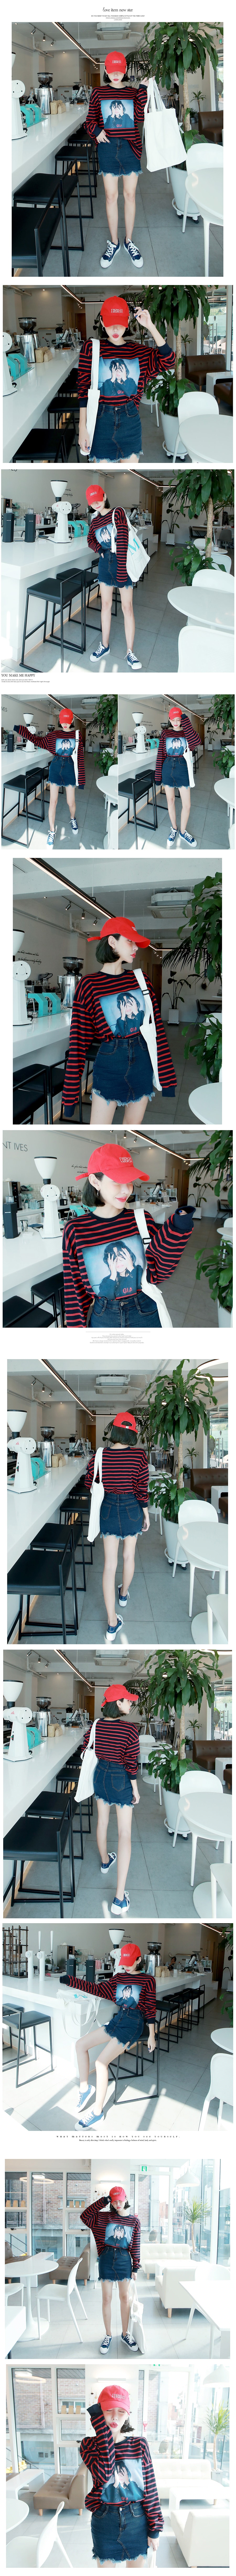 [KOREA] Striped Patch T-Shirt #Black&amp;Red One Size(Free) [免费配送]